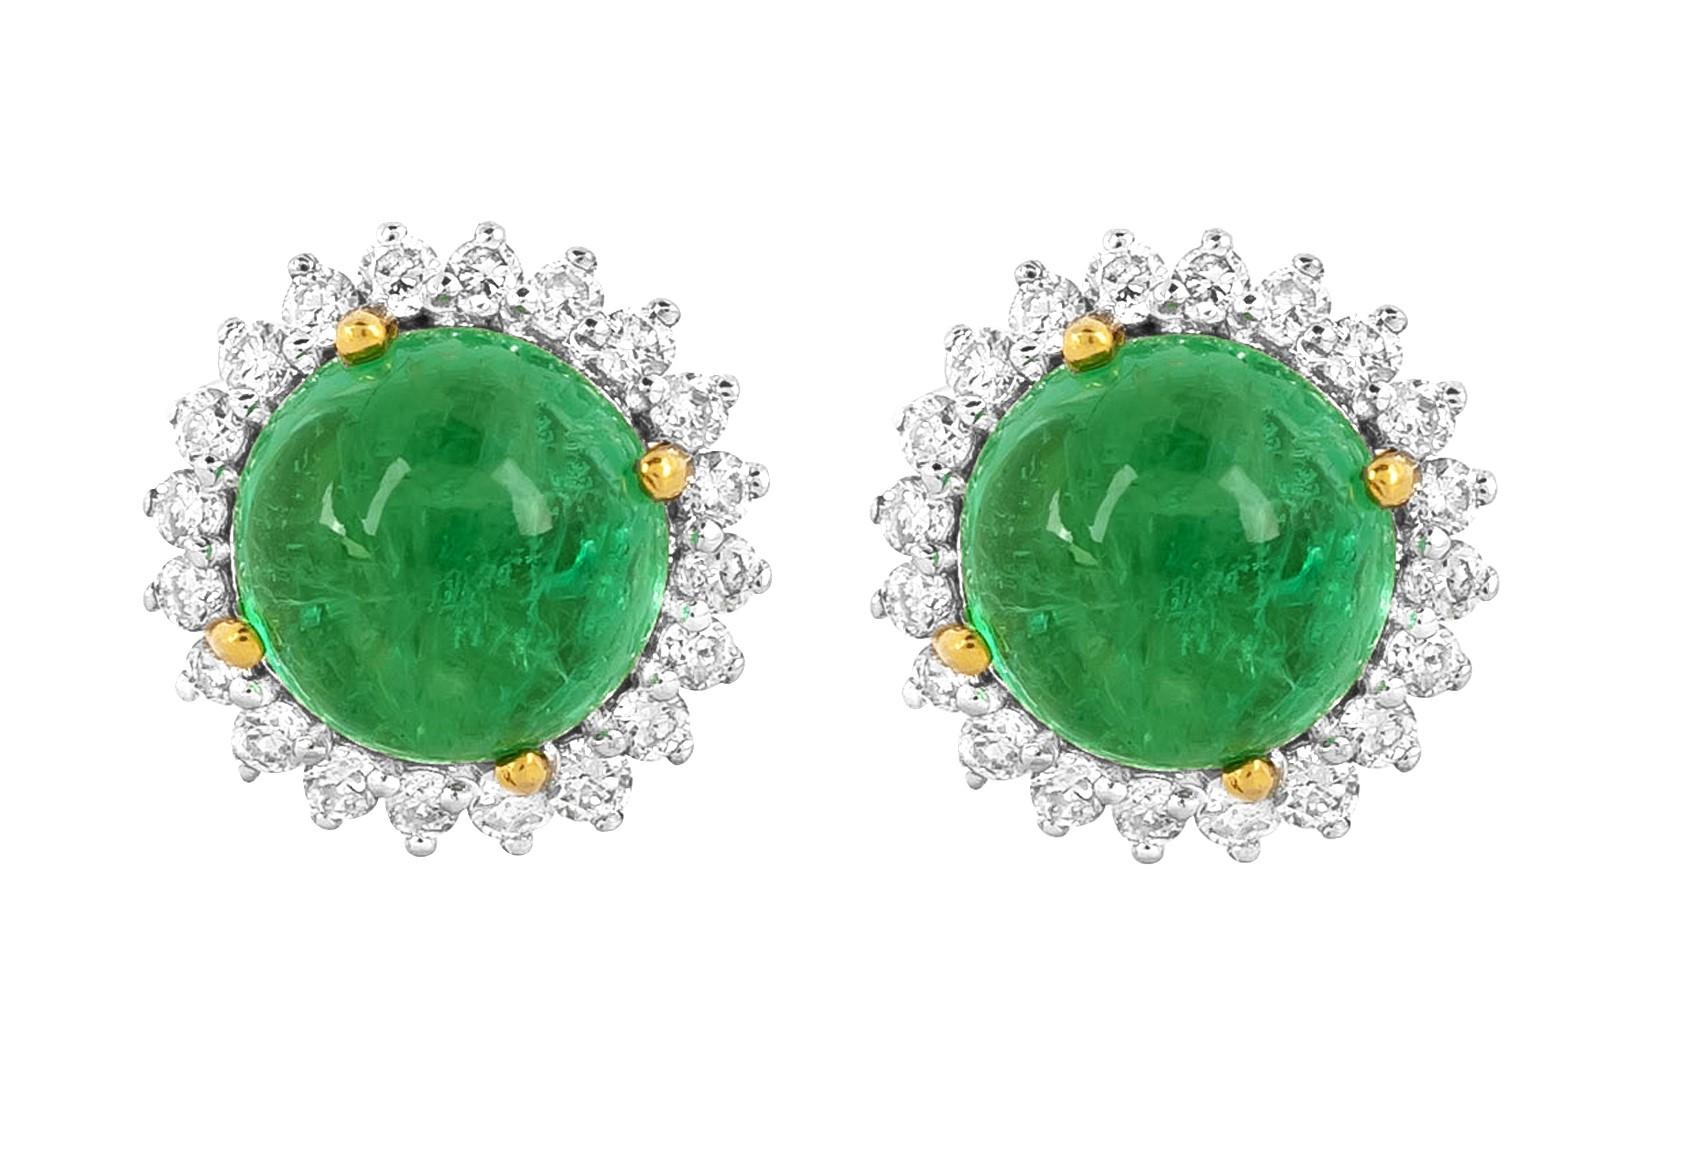 Discover the exquisite fusion of sophistication in our 18 Karat Gold 2.72 Carat Diamond and Emerald Cocktail Stud Earrings. Each piece epitomizes exceptional craftsmanship and a distinctive selection, harmoniously merging classic beauty with modern